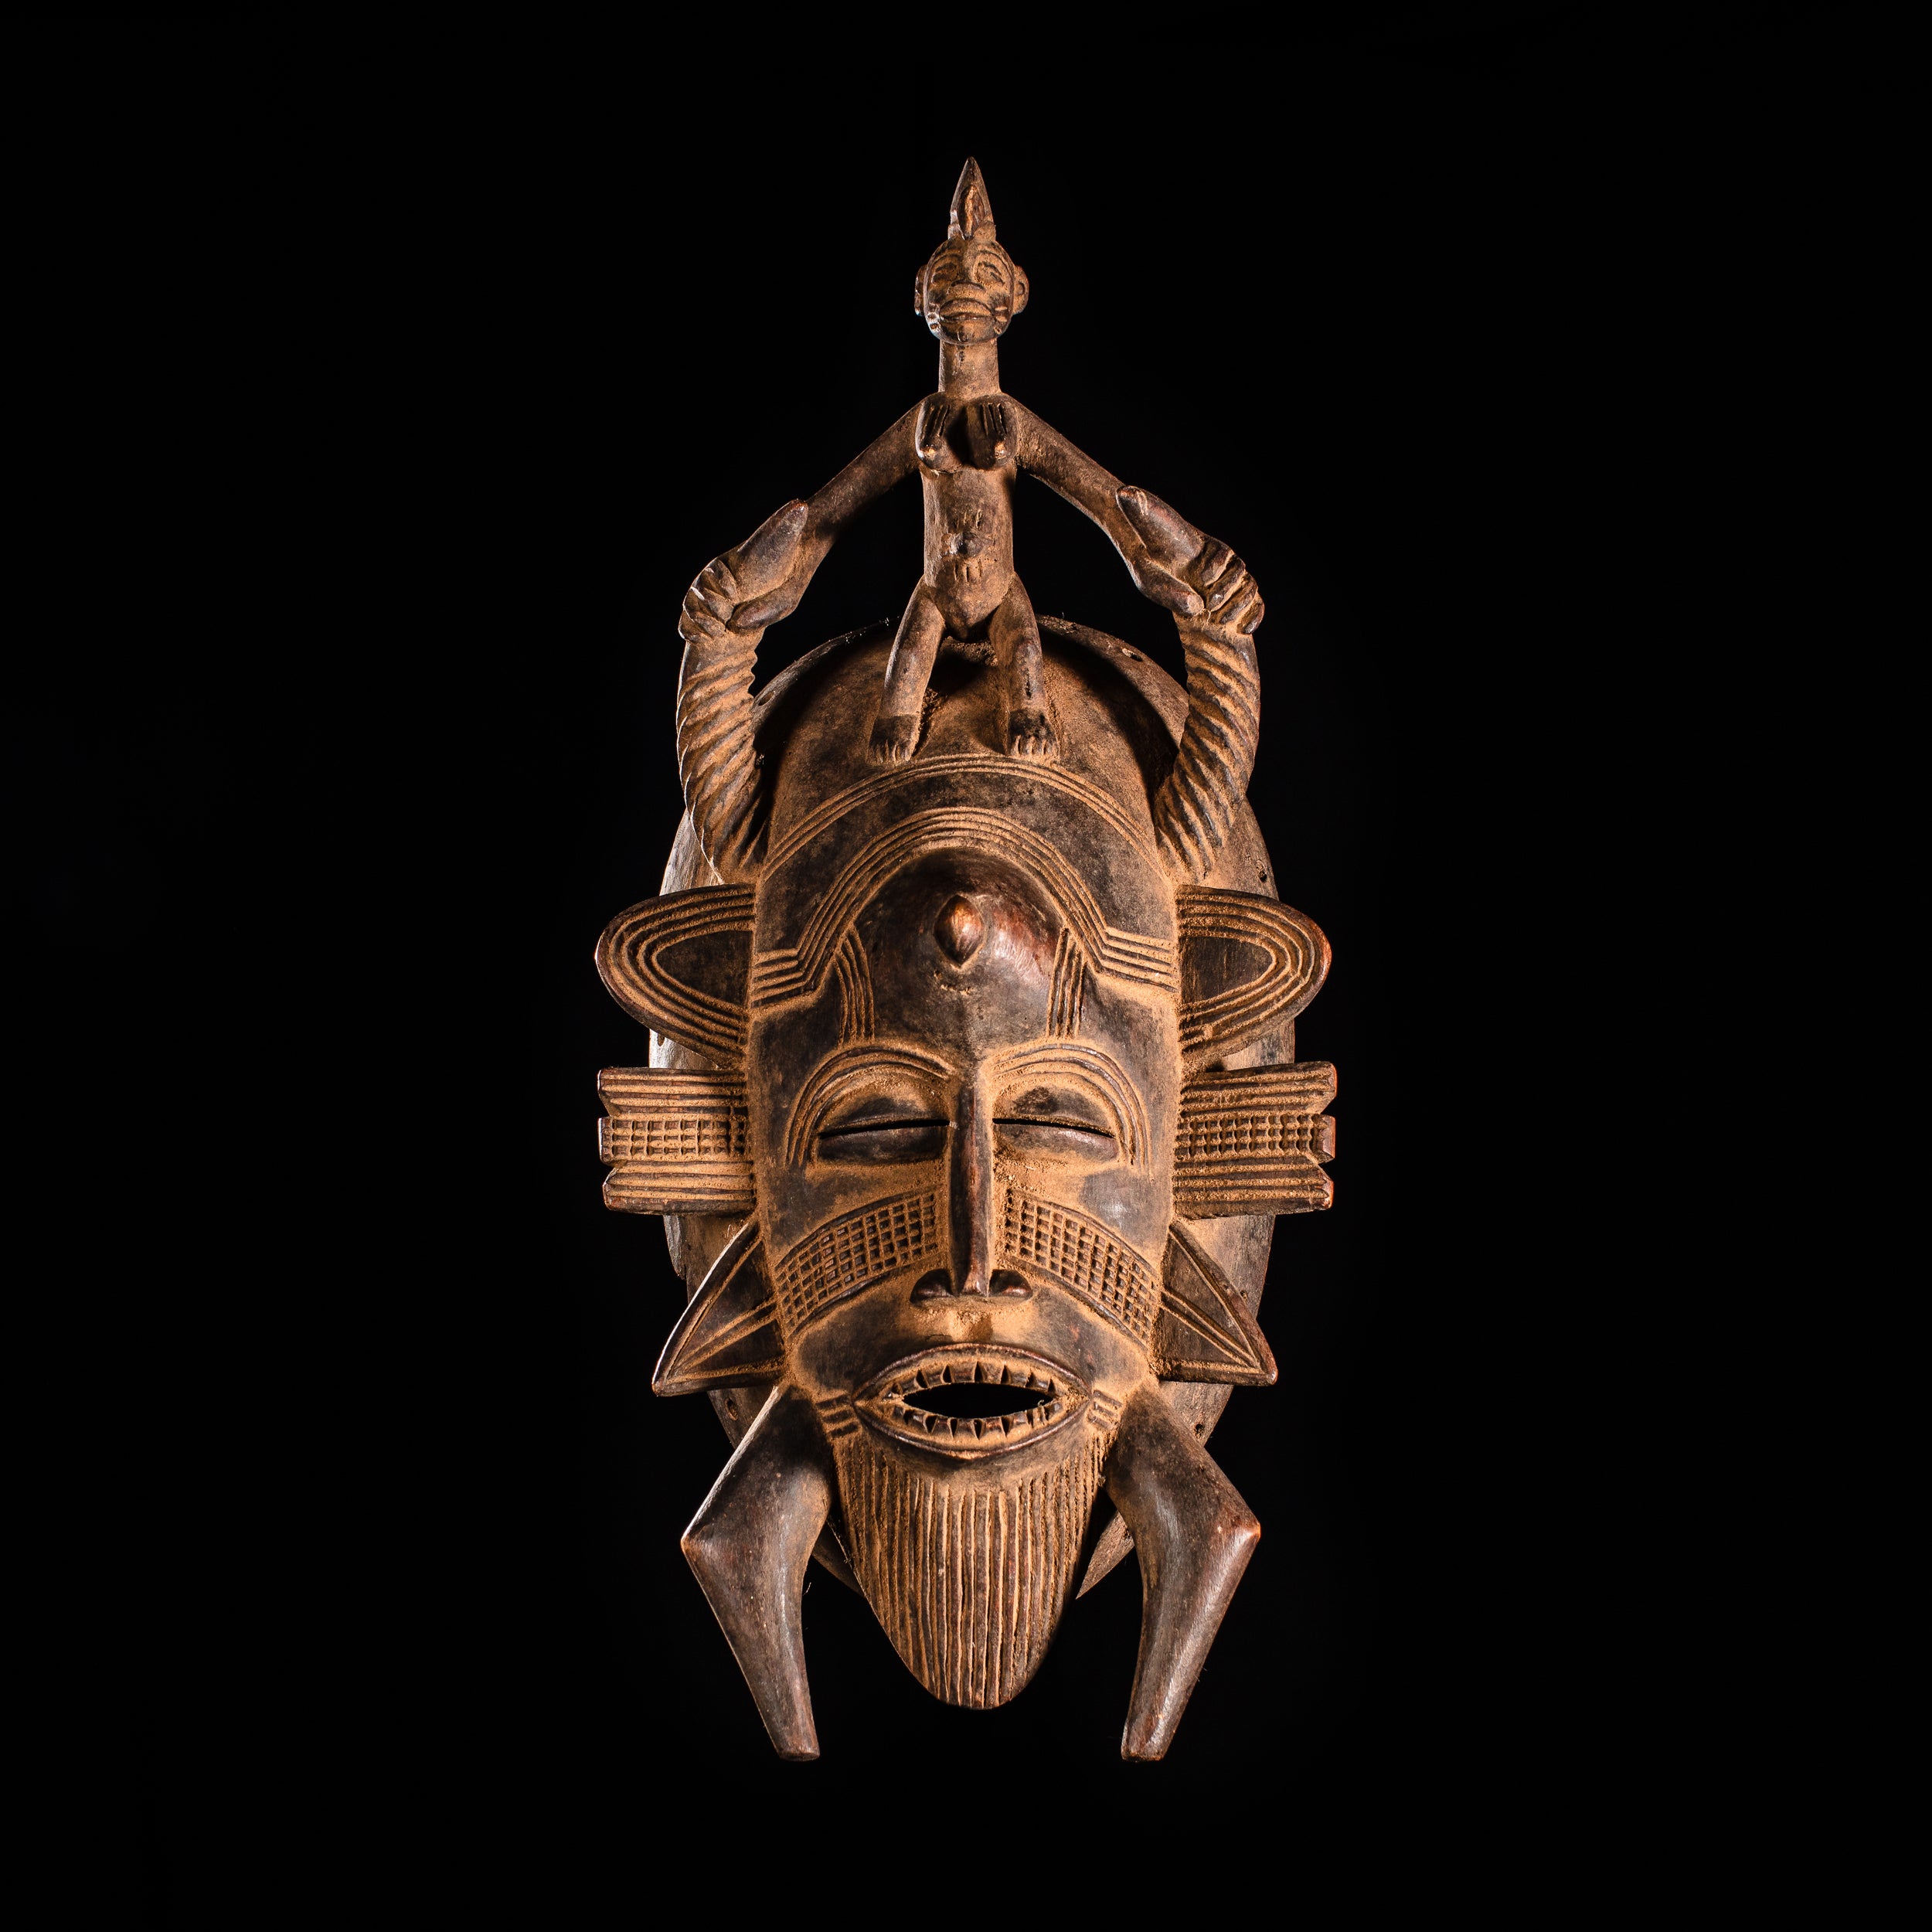 Tribal Masks - Handcrafted - Senufo Masks - Traditional Folk Art - African Artifacts Sculptures - African Art Collector - This Senufo tribal face mask from Kpelie is crafted from wood, with finely painted detail and raised accents. It makes an excellent addition to any home or art collection, offering a unique visual aesthetic and cultural representation. Heigh 14